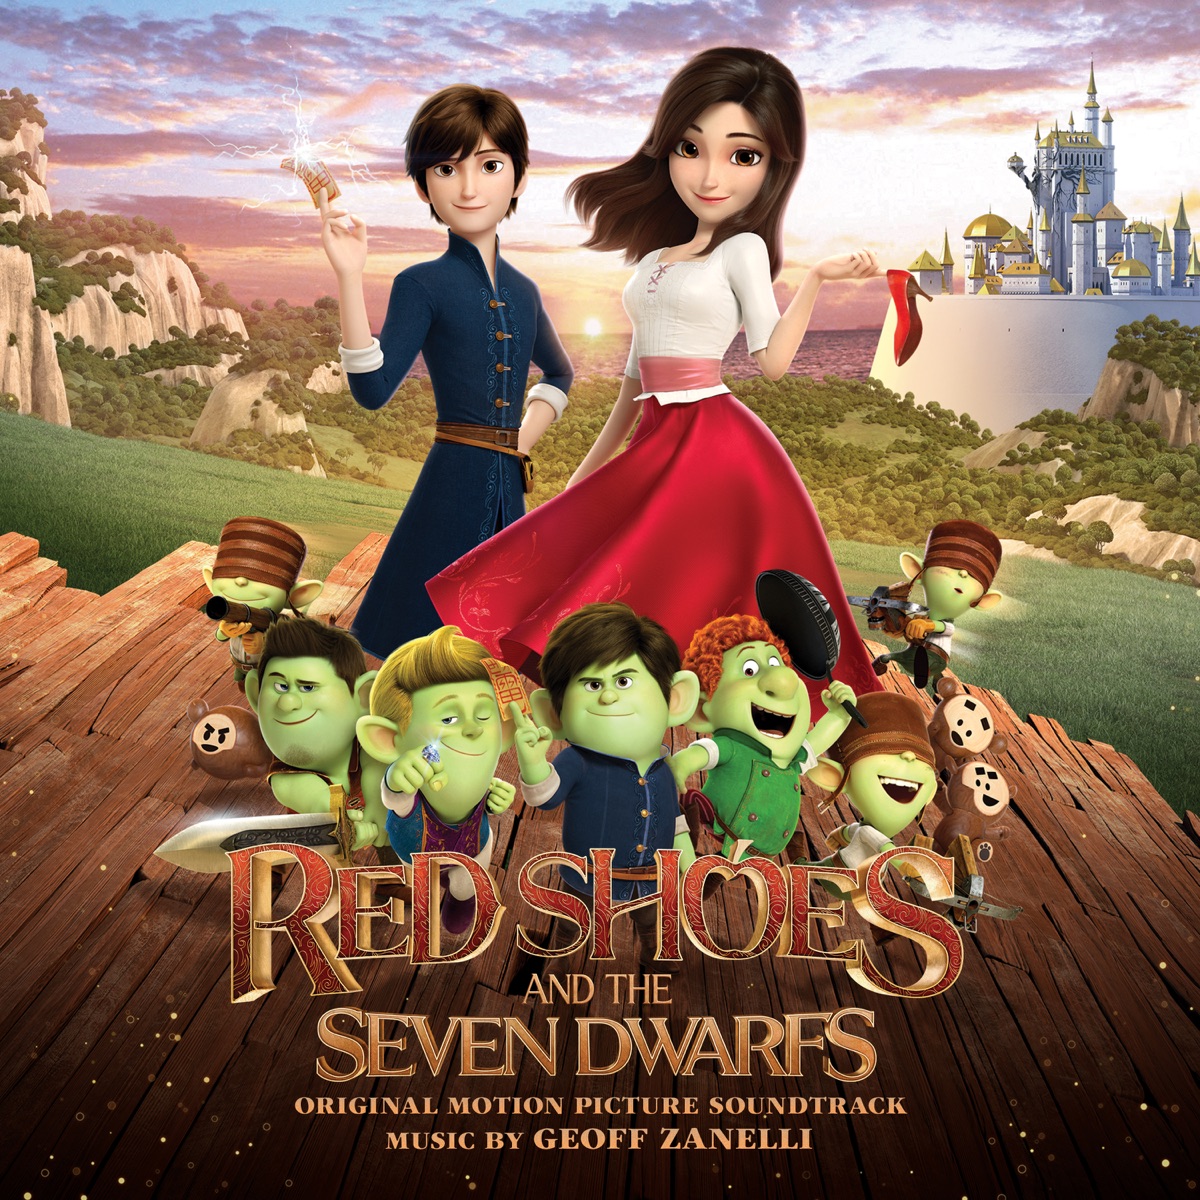 red shoes and the 7 dwarfs full movie online 123movies